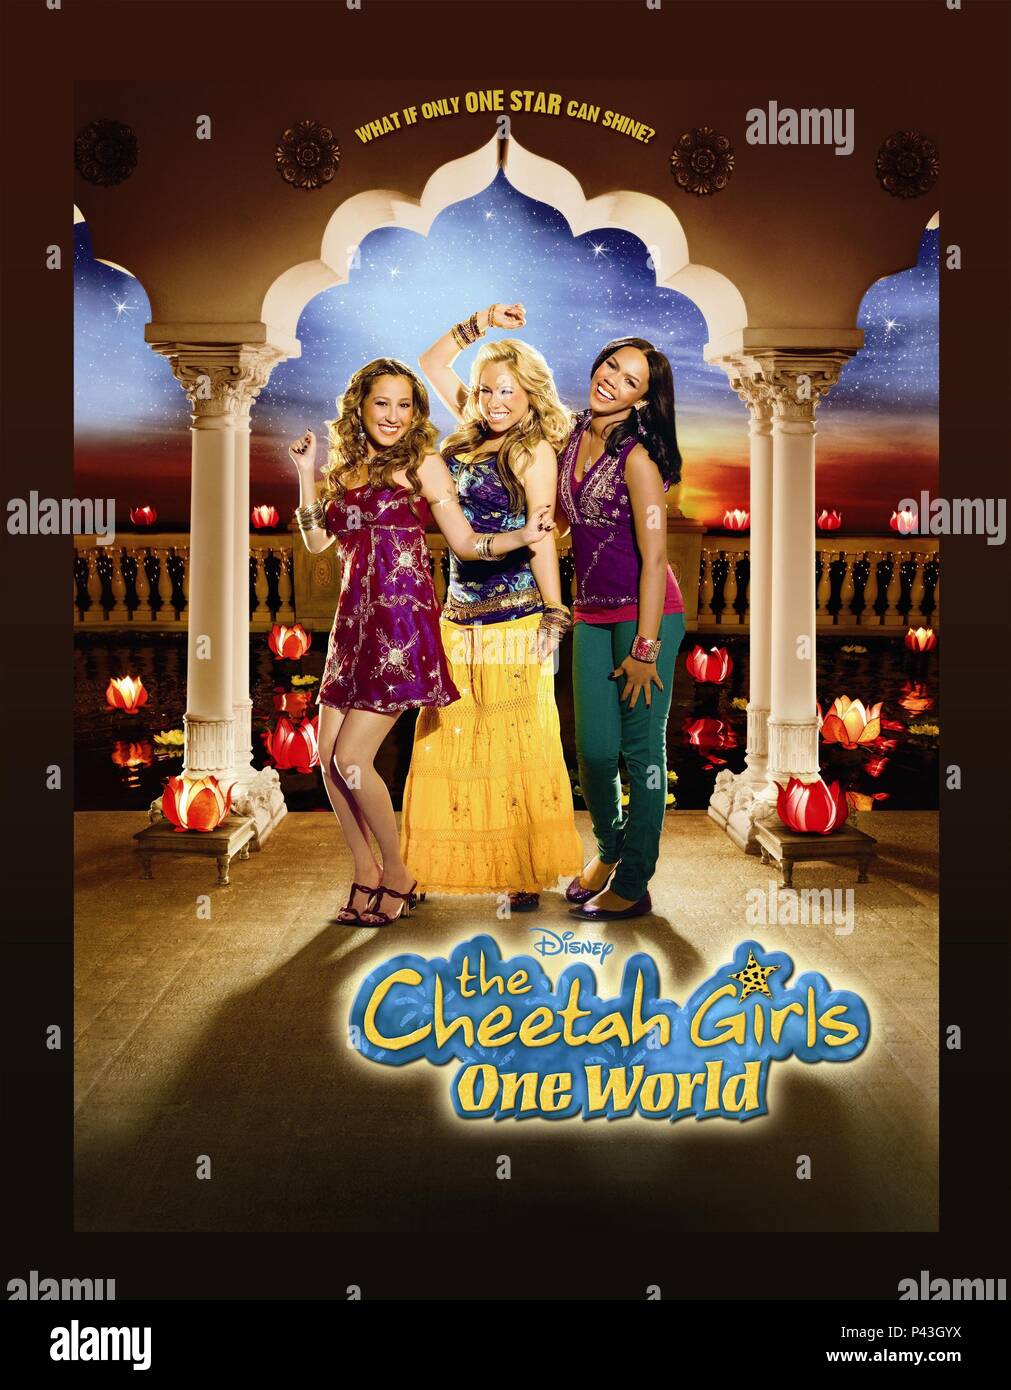 Original Film Title: CHEETAH GIRLS, THE: ONE WORLD-TV.  English Title: CHEETAH GIRLS, THE: ONE WORLD-TV.  Film Director: PAUL HOEN.  Year: 2008. Credit: KHUSSRO FILMS/MARTIN CHASE PRODUCTIONS/DISNEY CHANNEL / Album Stock Photo